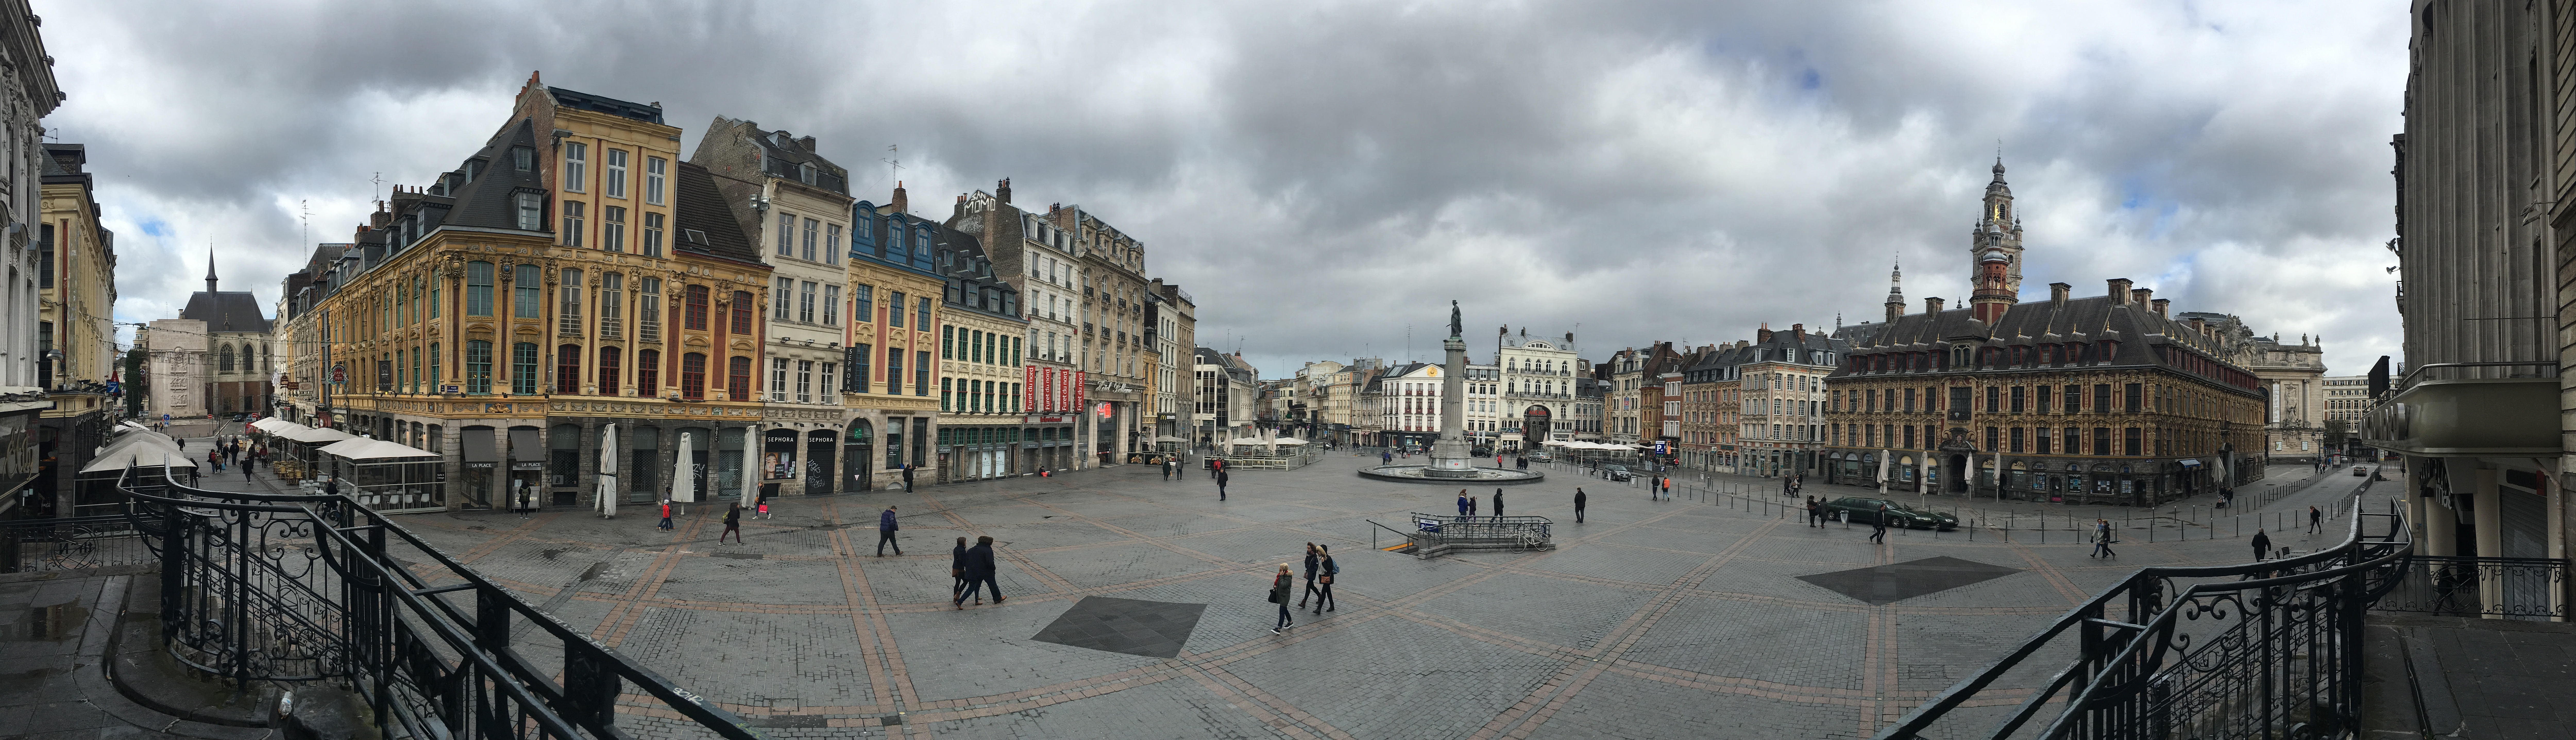 Grand 'Place Lille